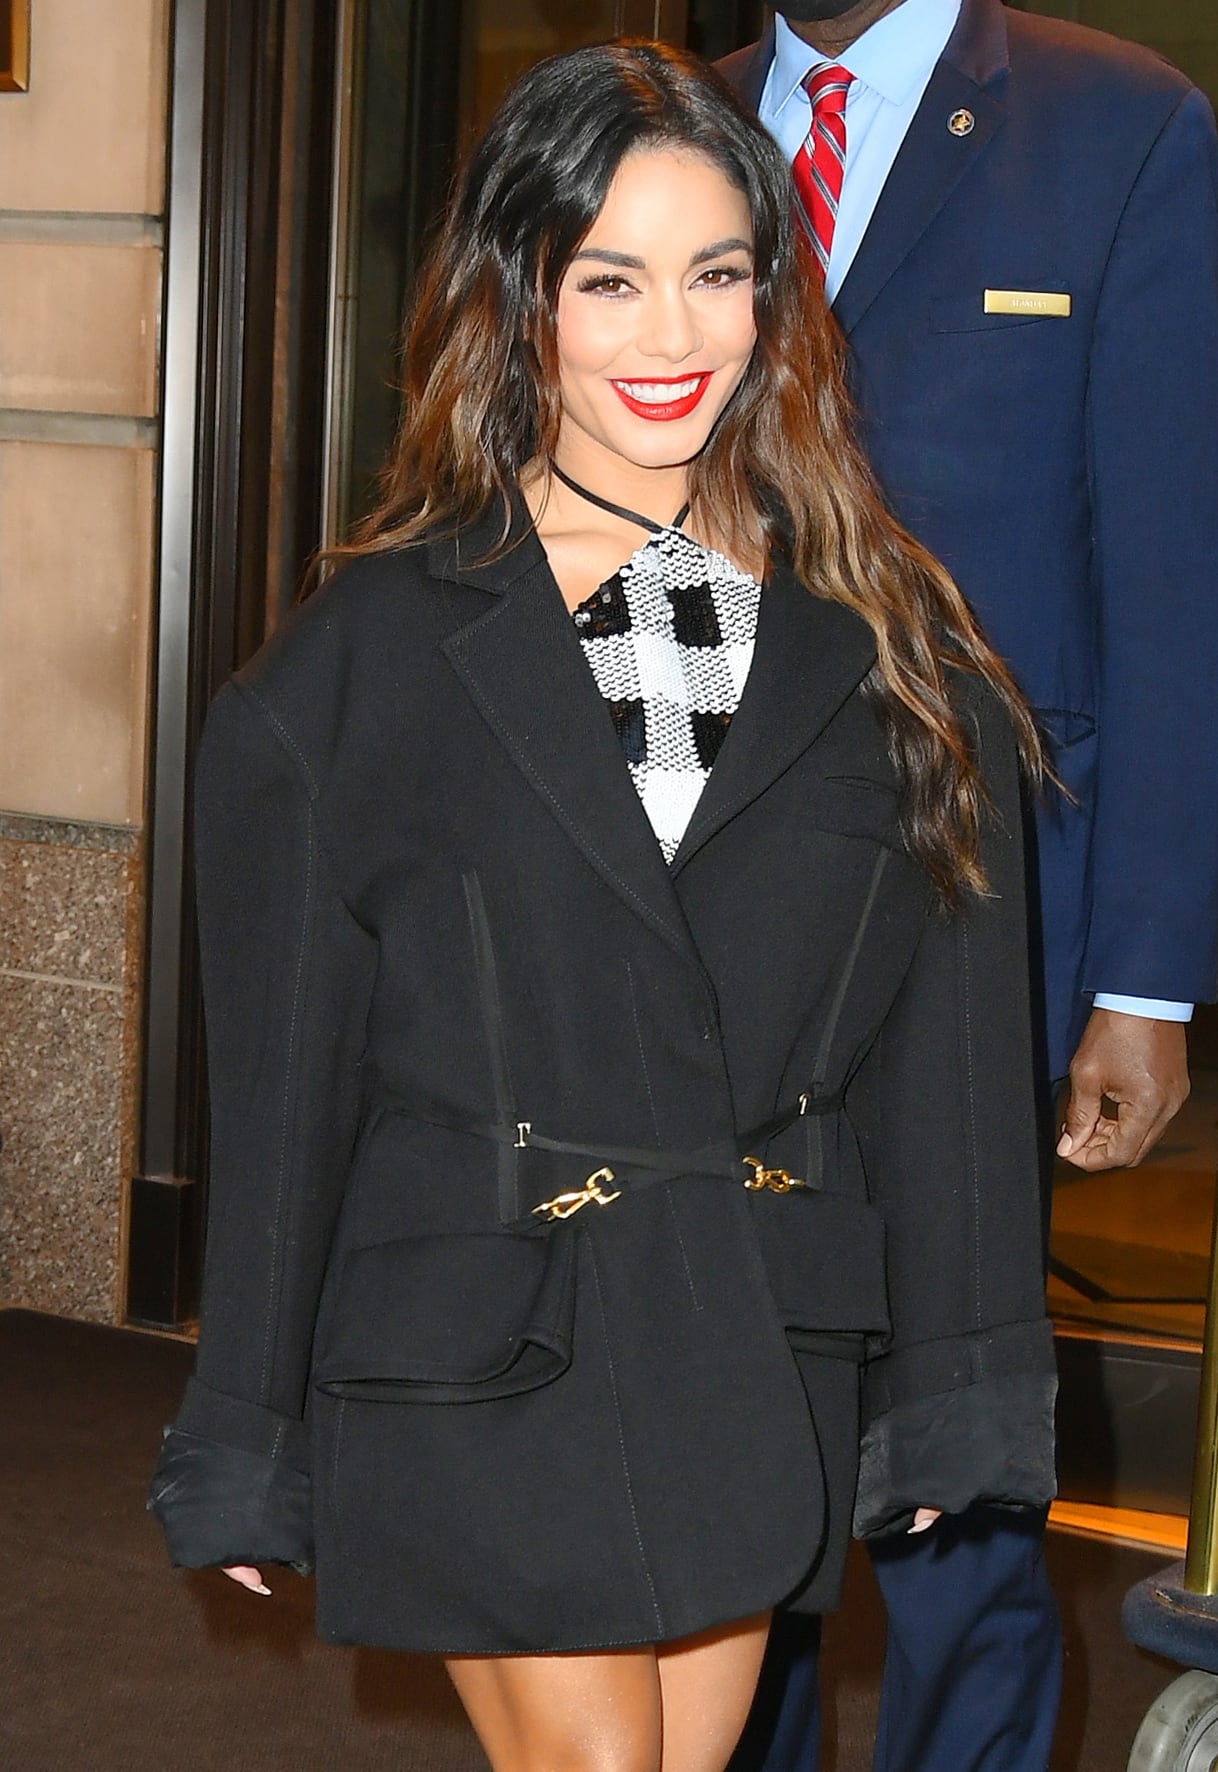 Vanessa Hudgens adds a pop of bold red lip color to the look and styles her long tresses in tousled waves